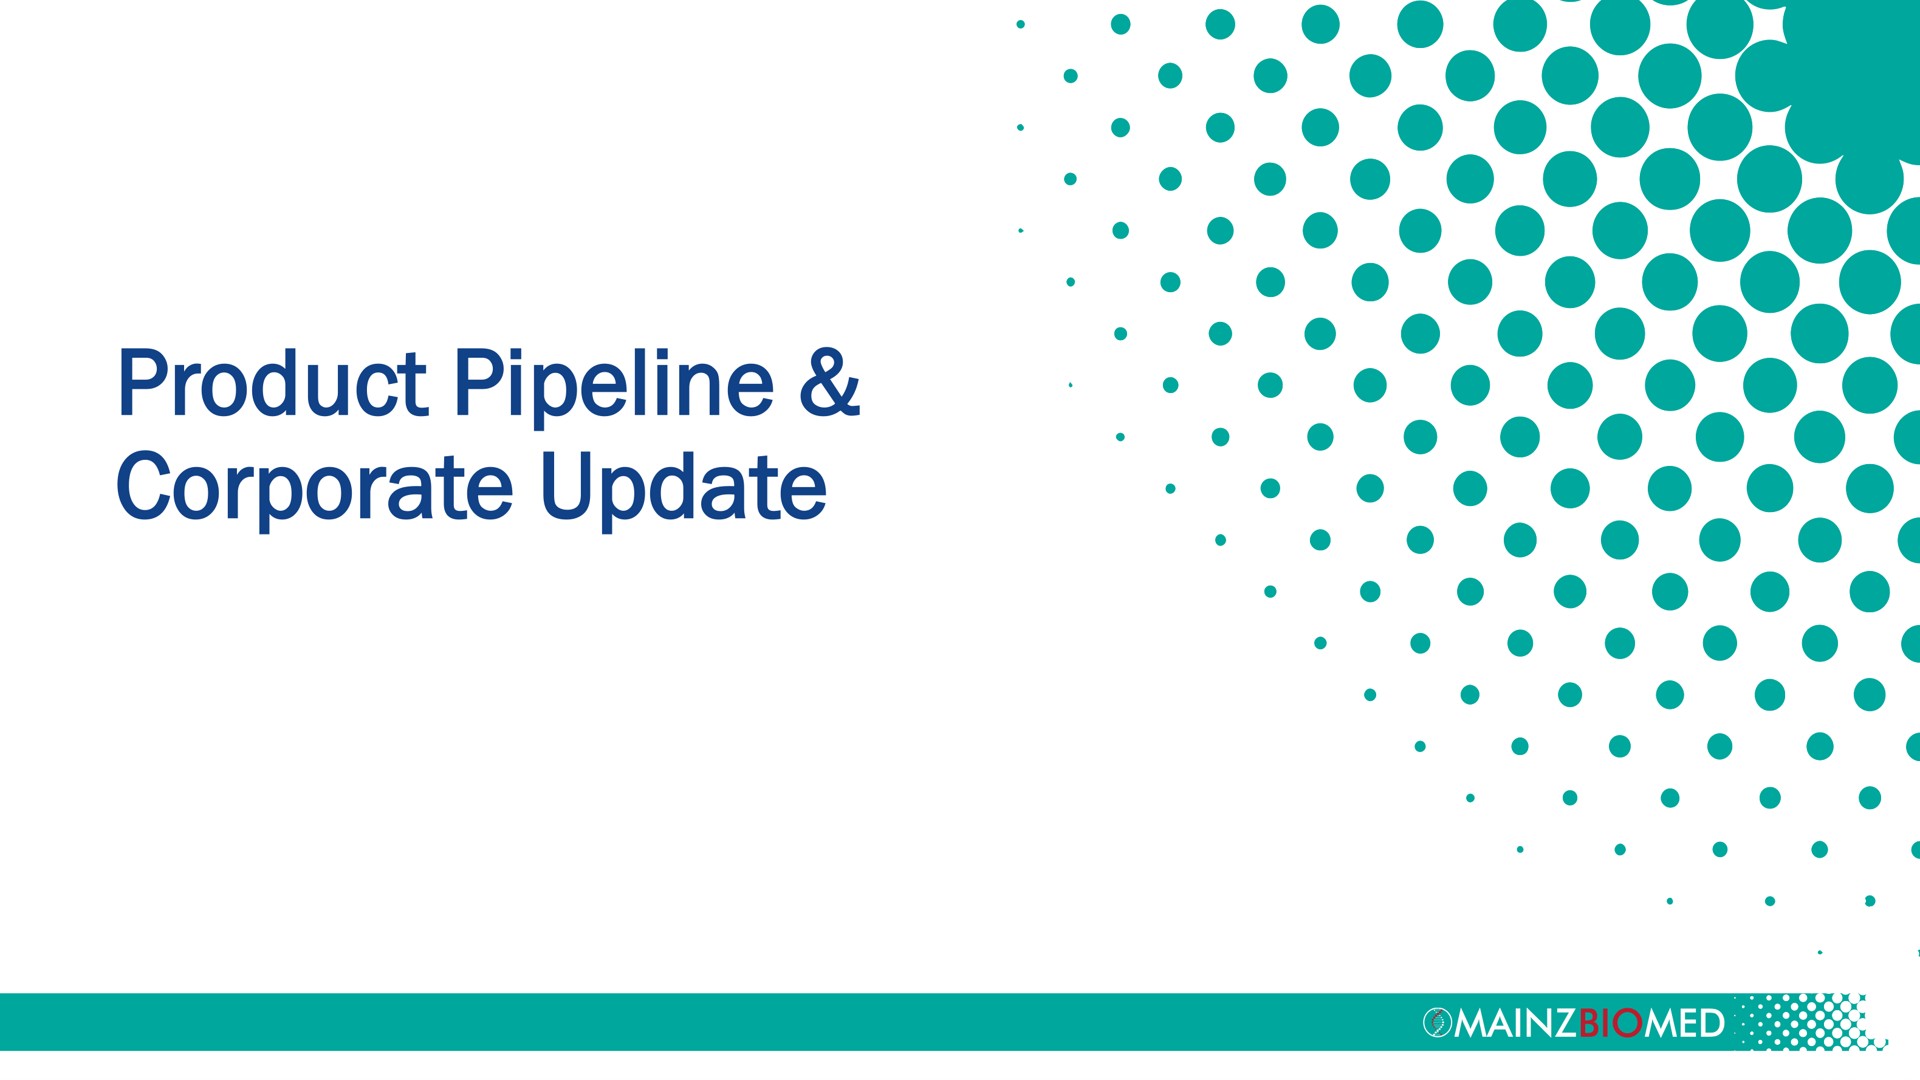 product pipeline corporate update is on | Mainz Biomed NV